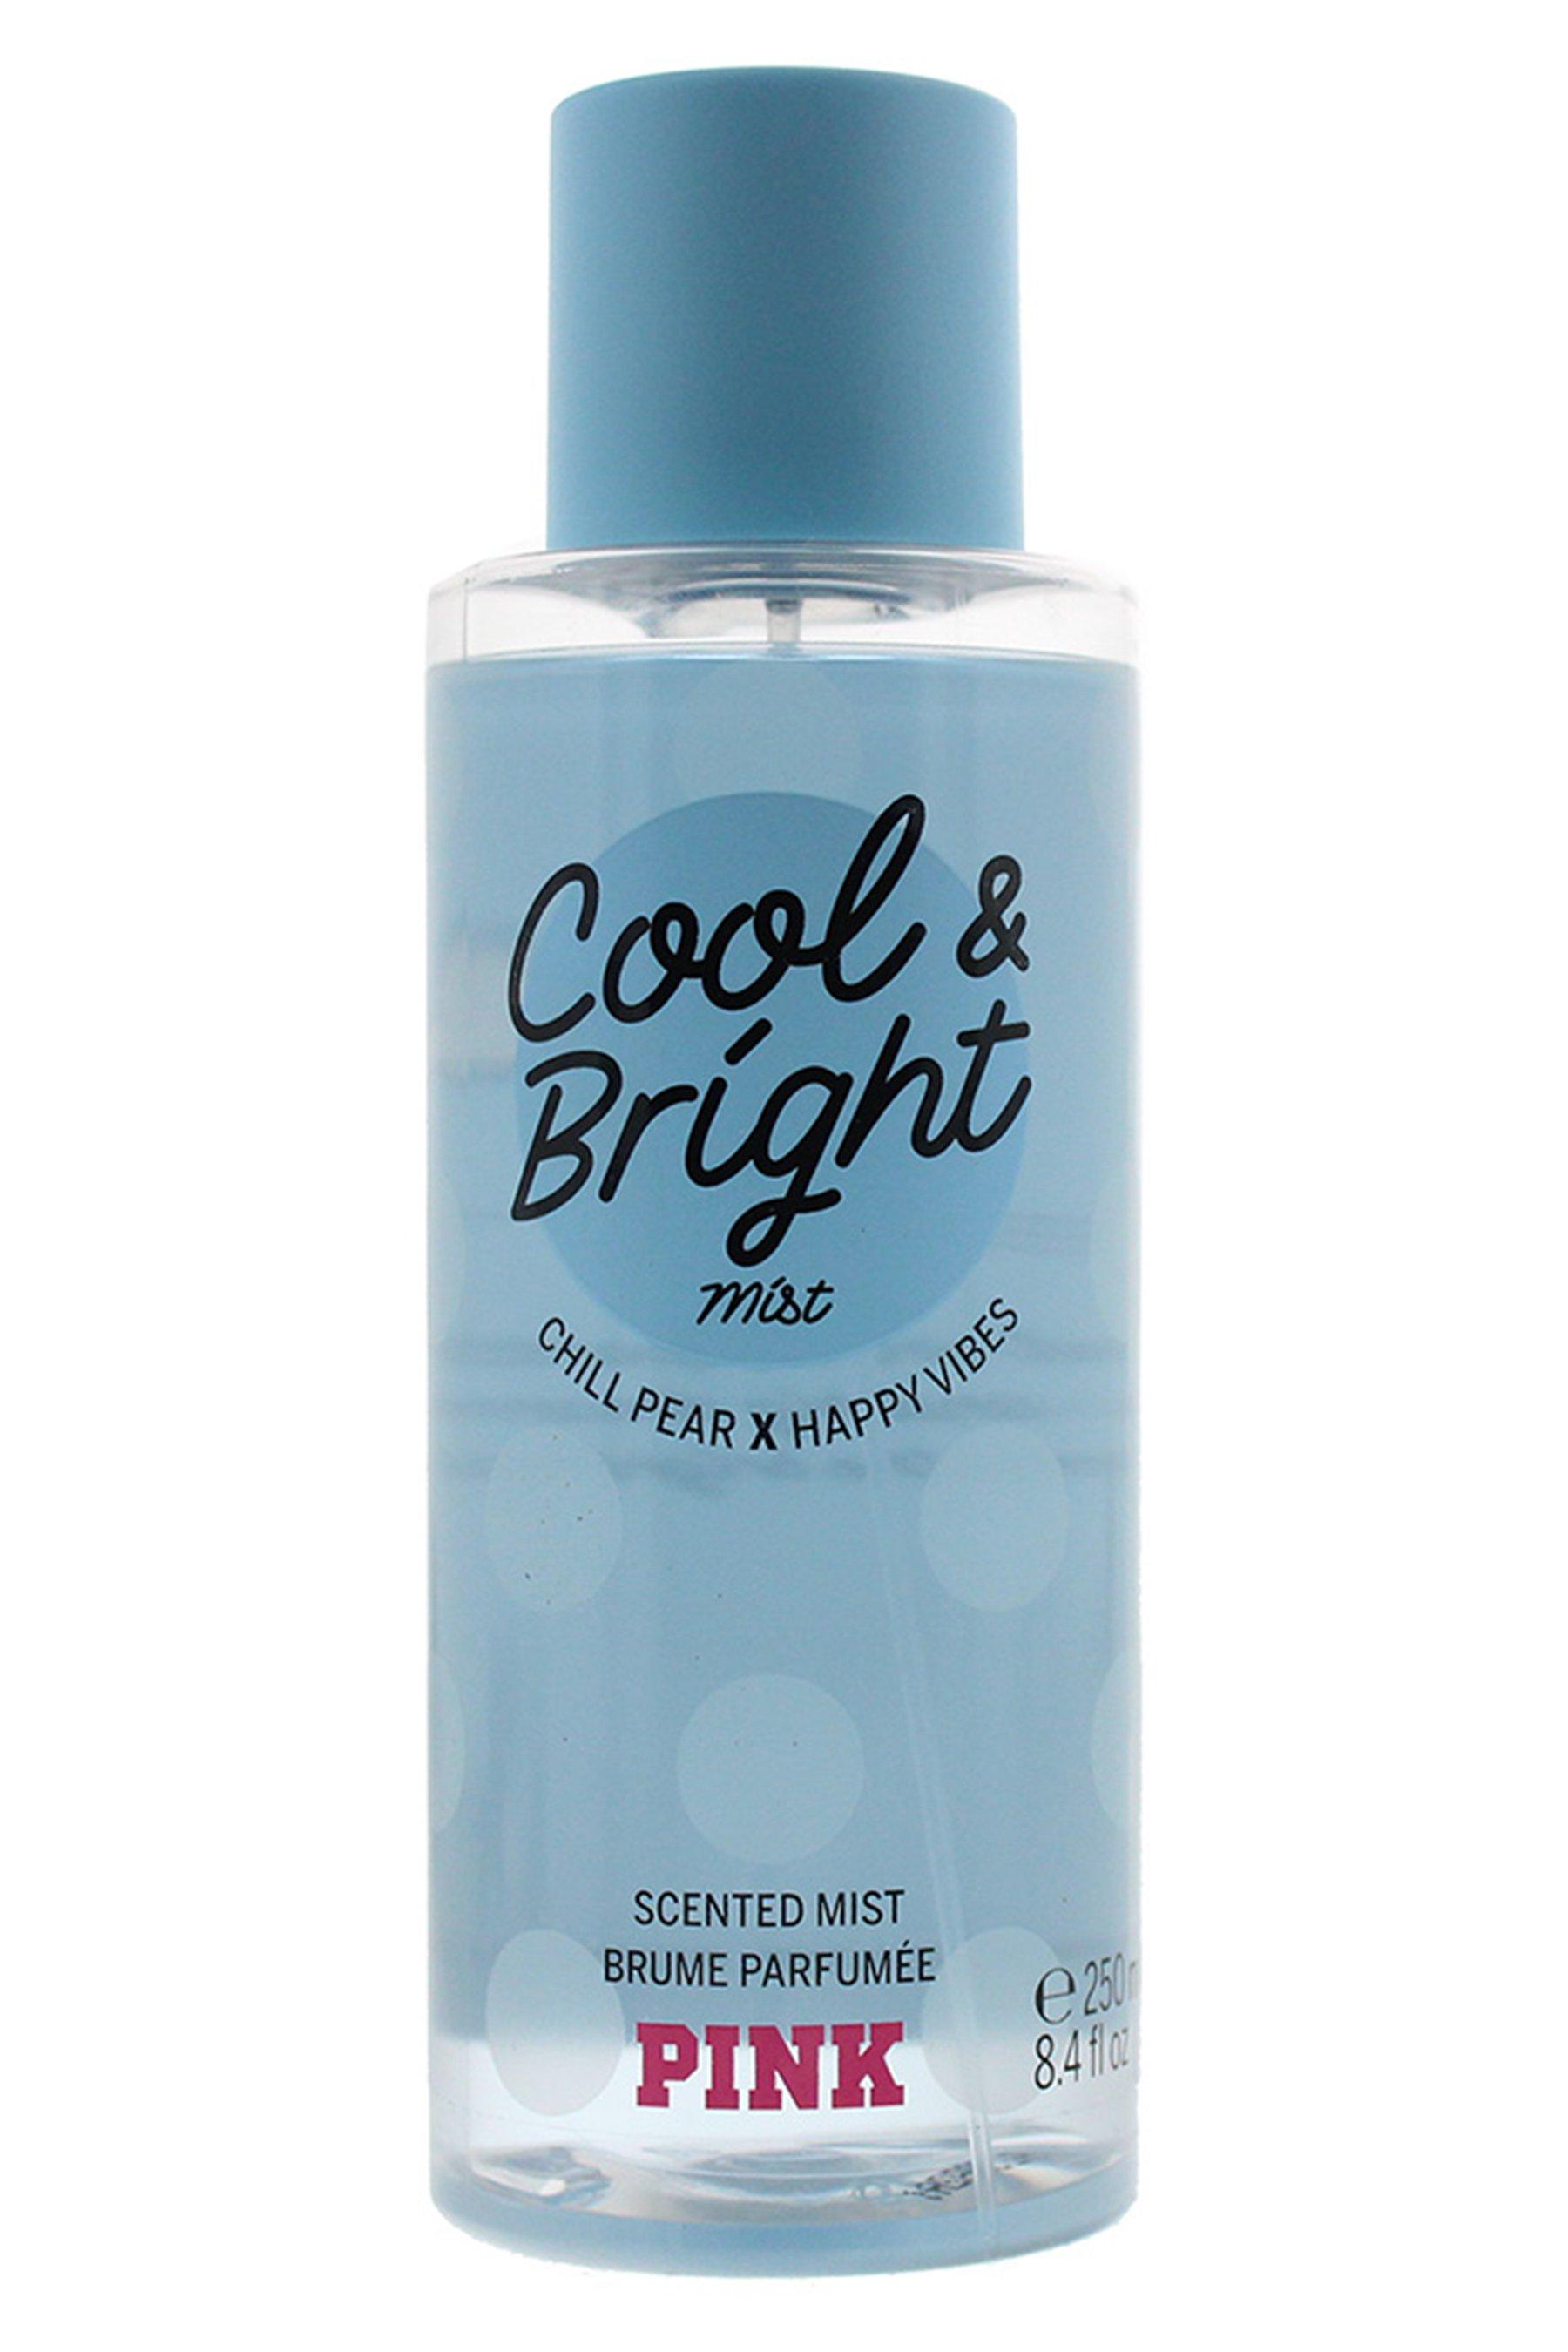 victorias secret pink cool and bright body mist - size: 250ml